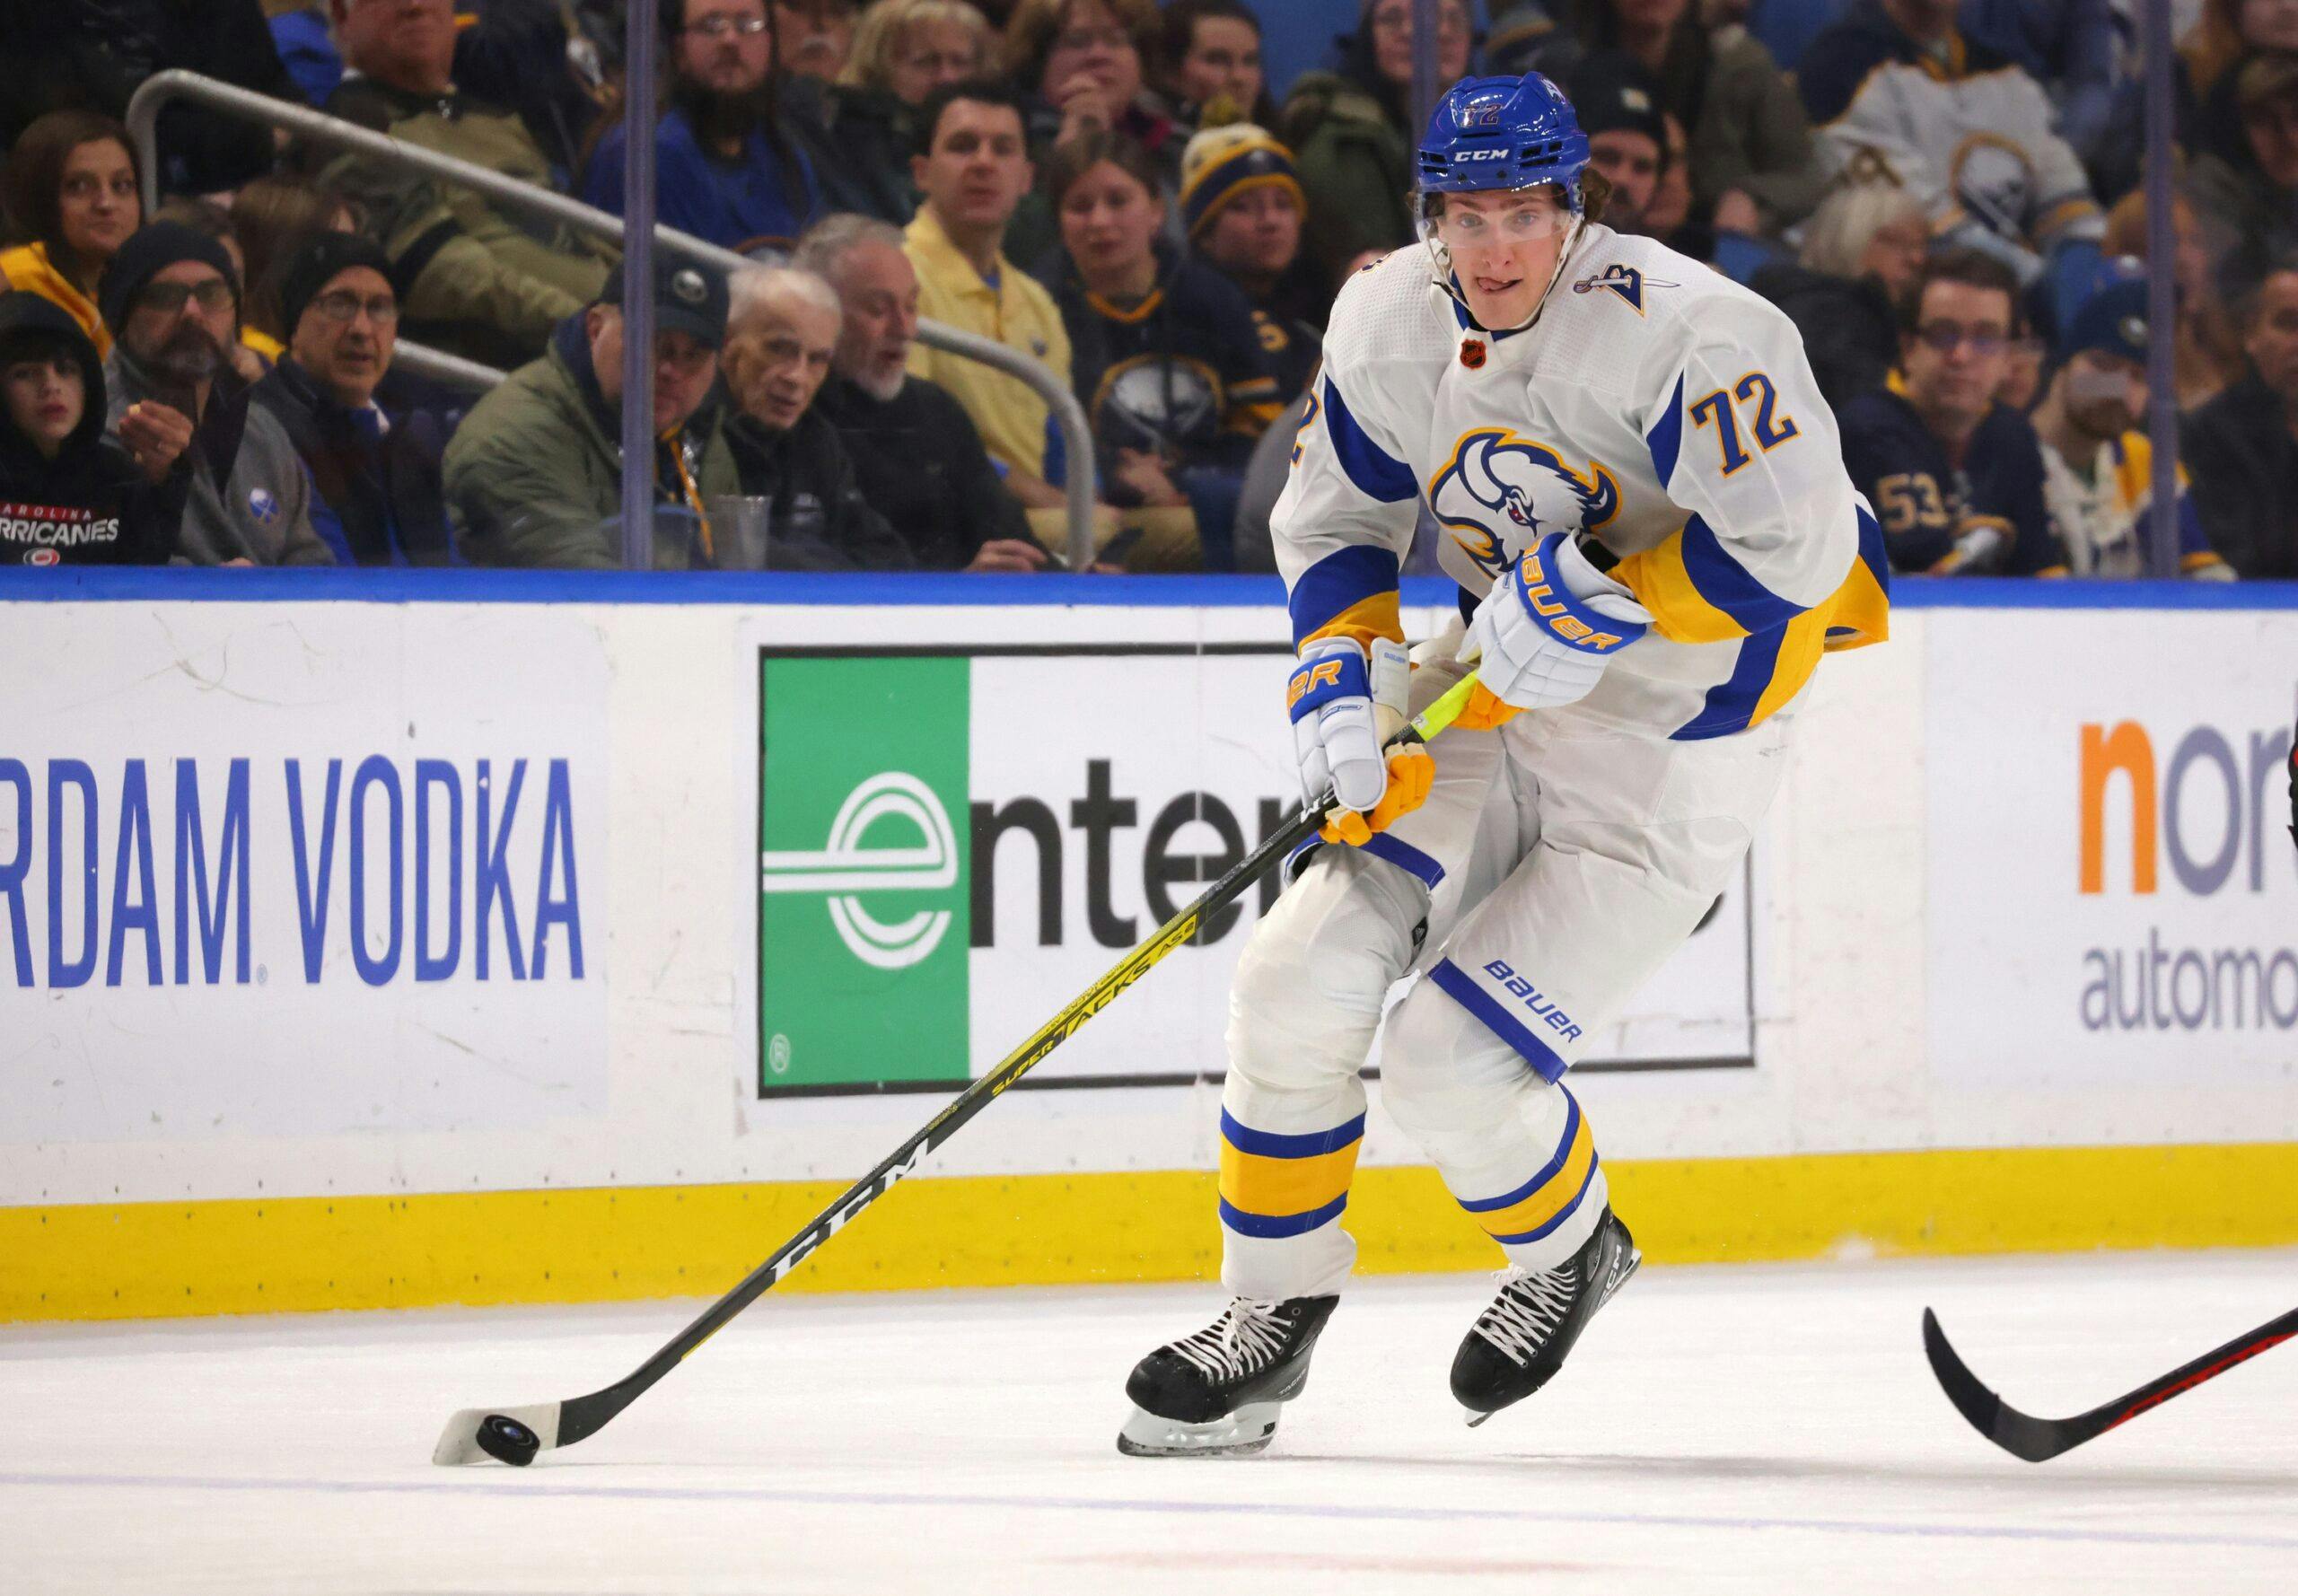 Buffalo Sabres forward Tage Thompson expected to return from injury Saturday